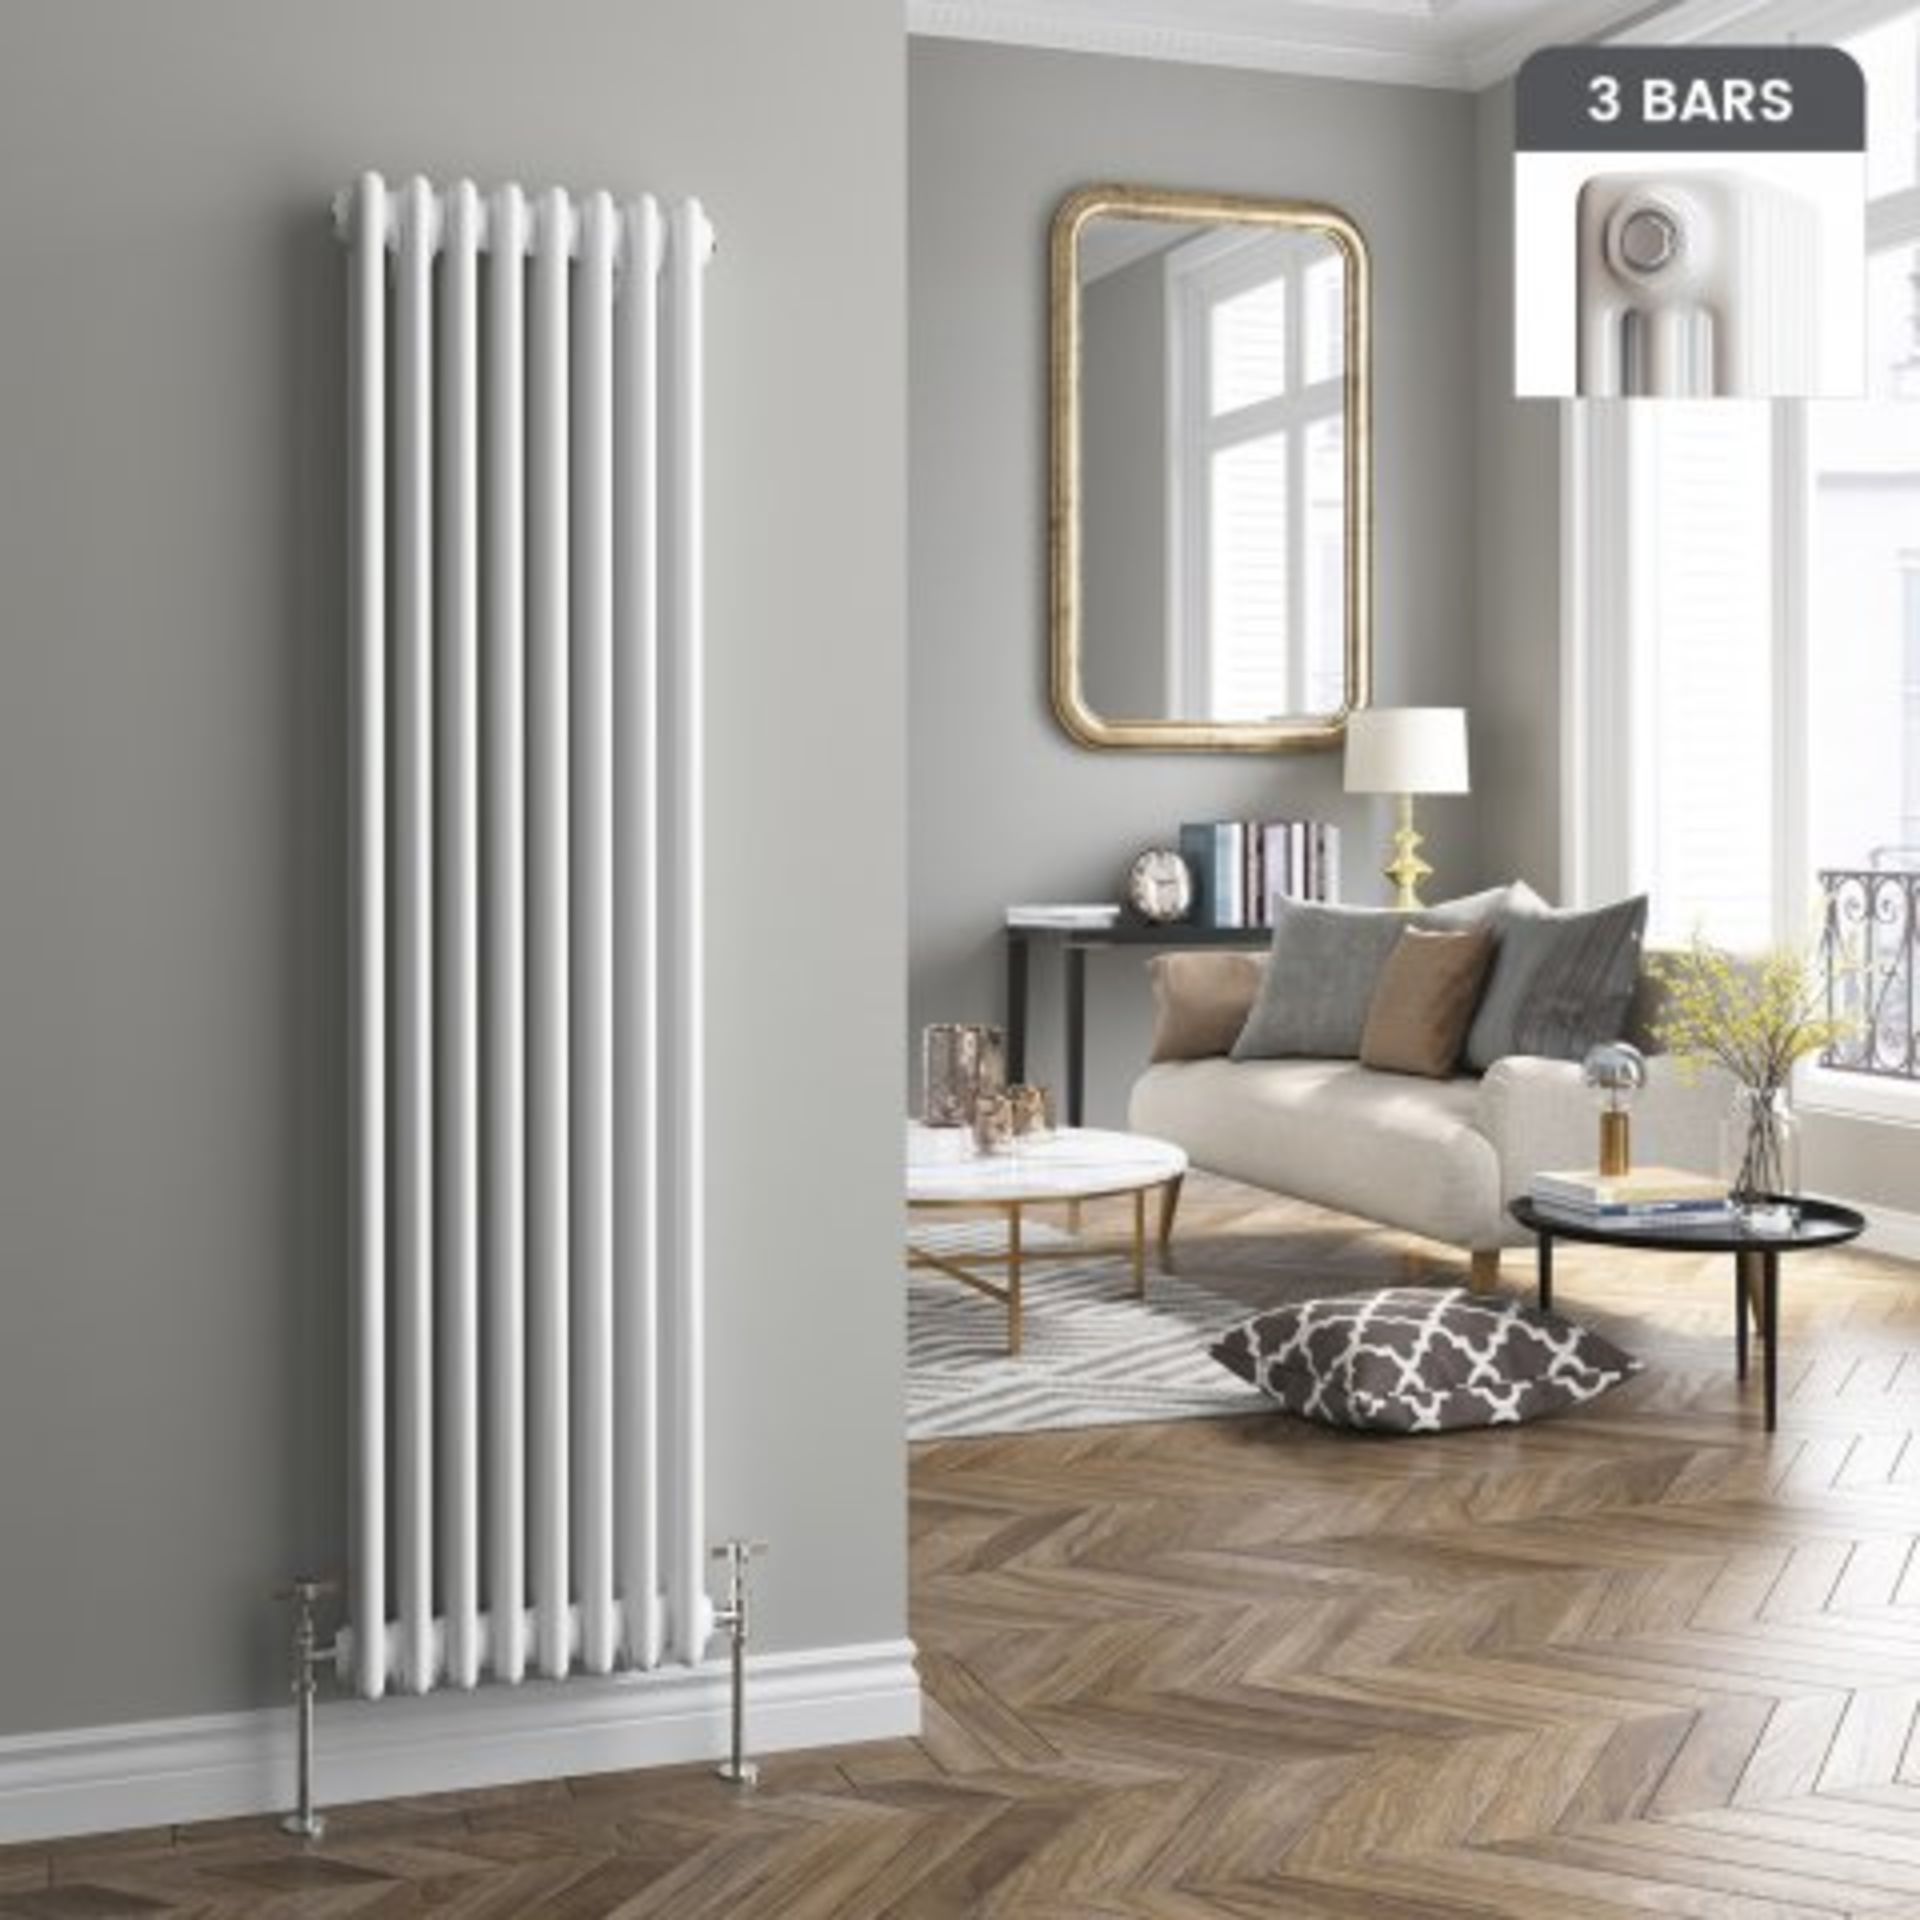 (P247) 1500x380mm White Triple Panel Vertical Colosseum Traditional Radiator. RRP £371.99. Classic